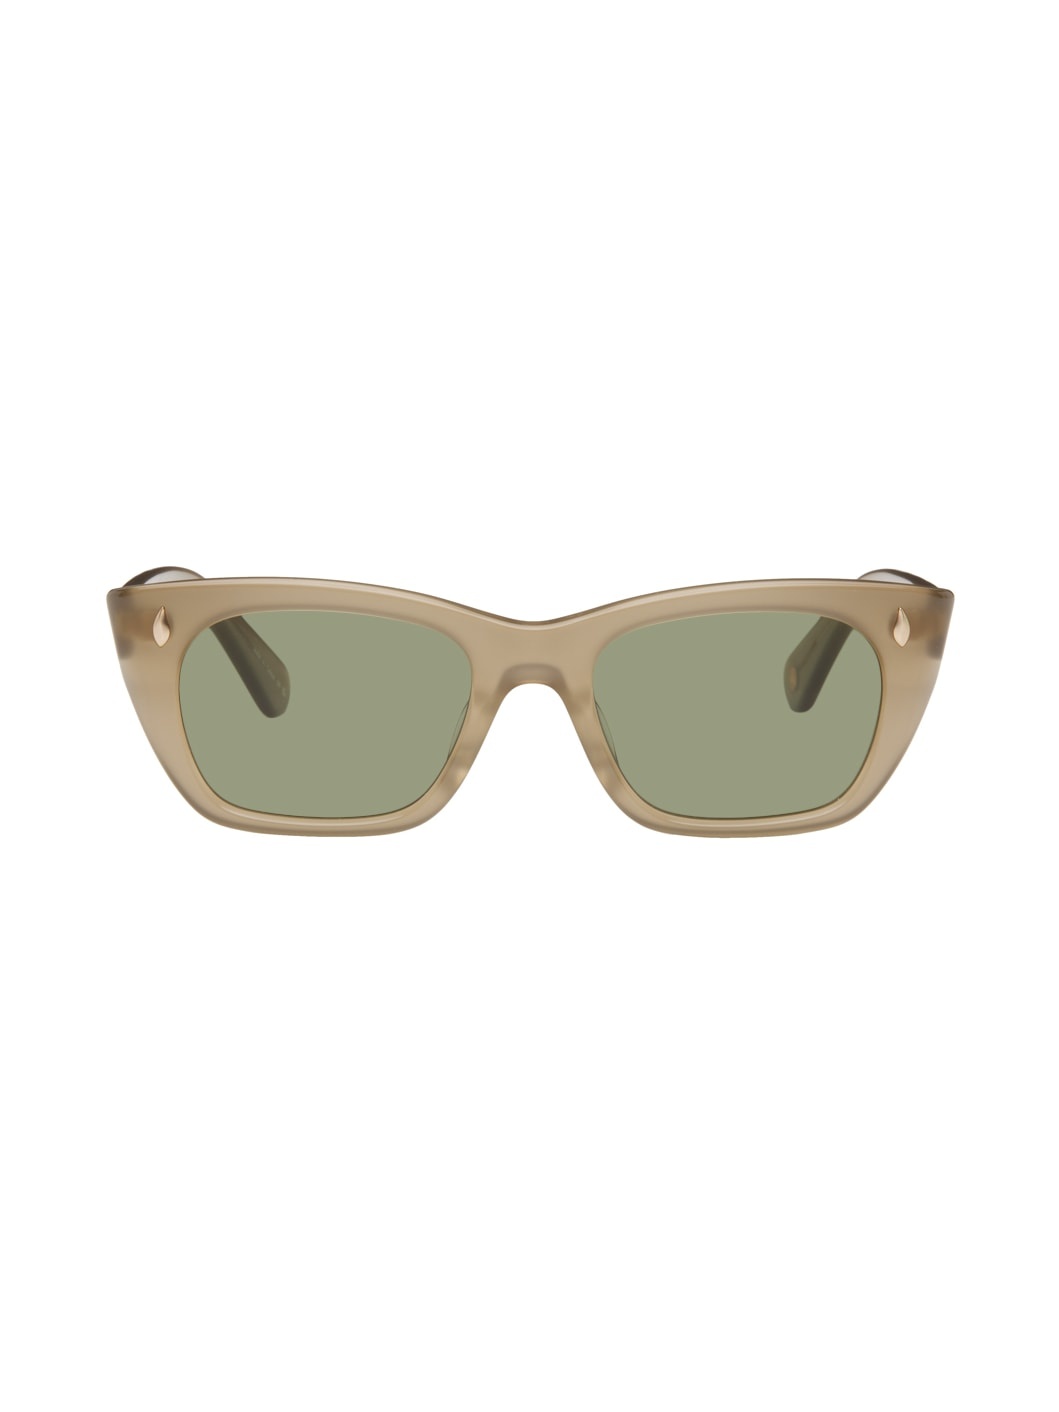 Taupe Webster Sunglasses - 1